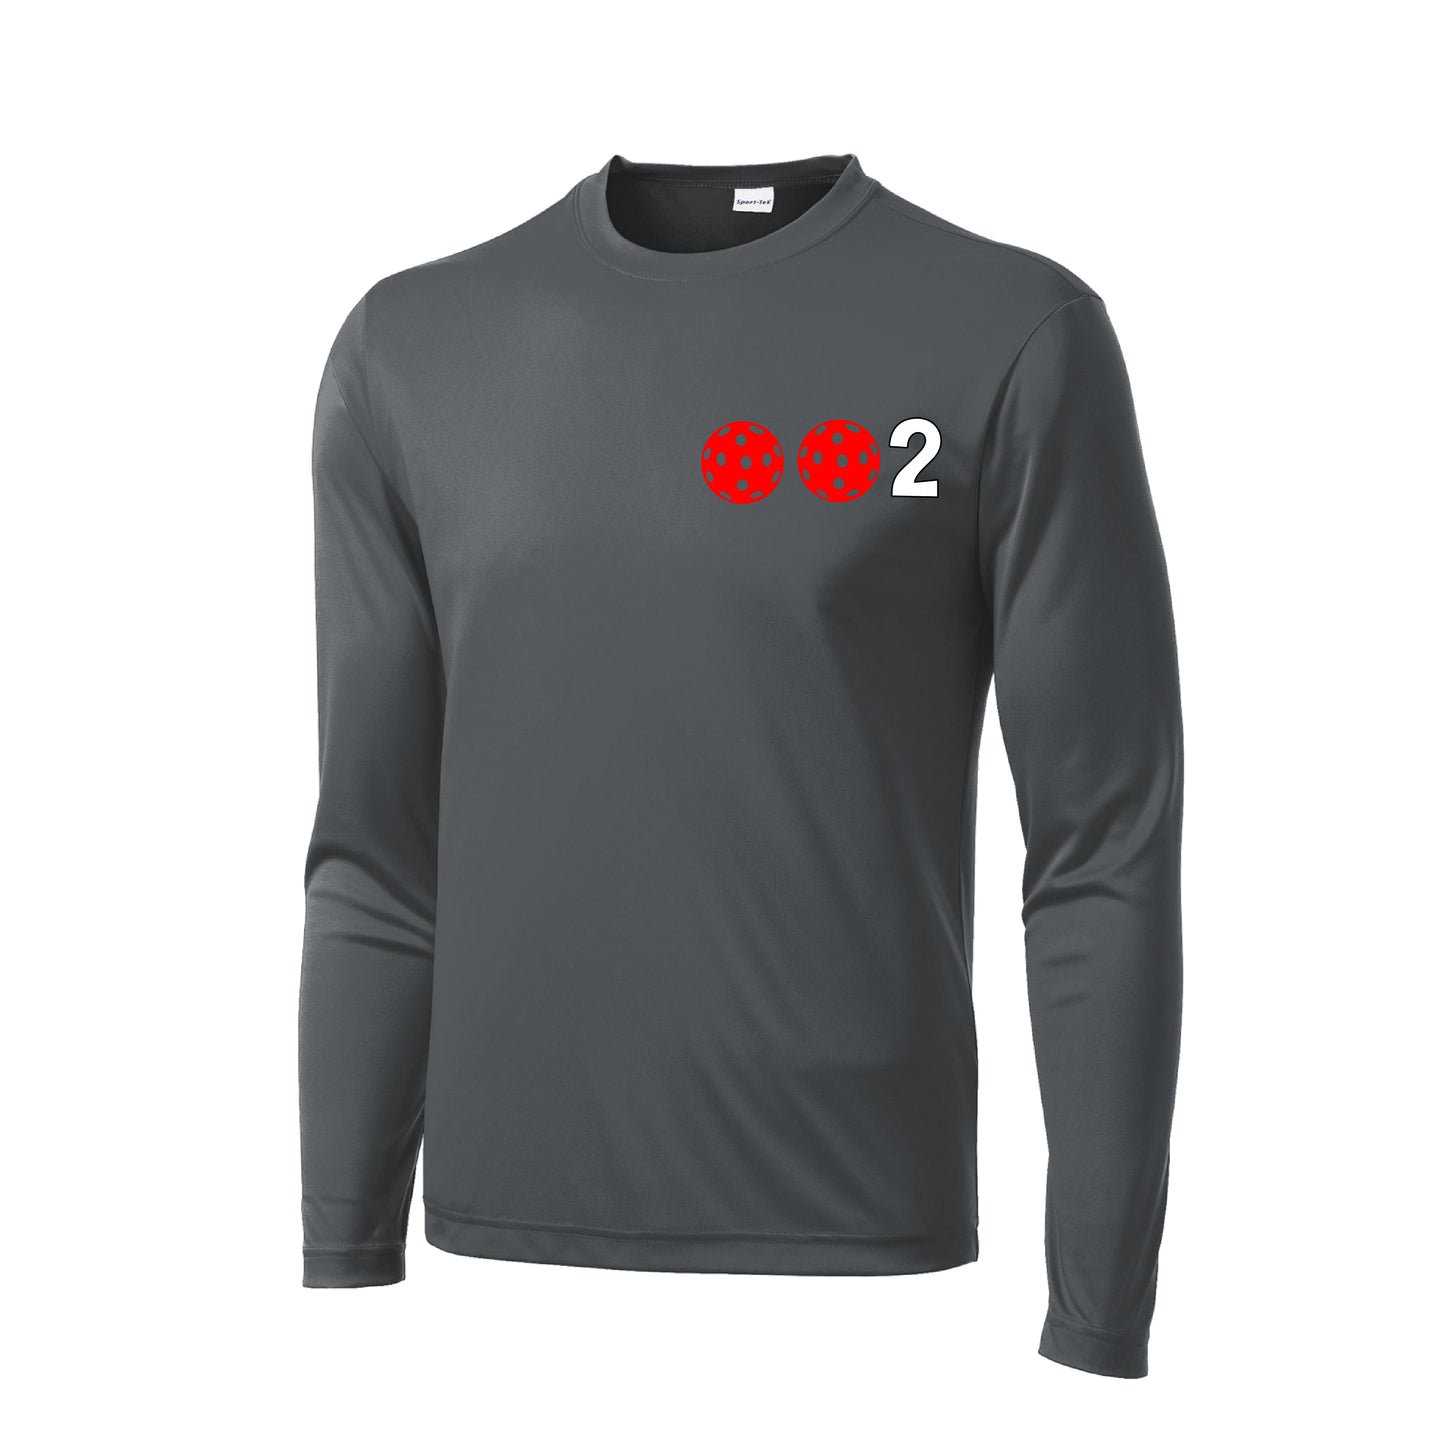 002 With Pickleballs (Green Orange Red) Customizable | Men's Long Sleeve Athletic Shirt | 100% Polyester